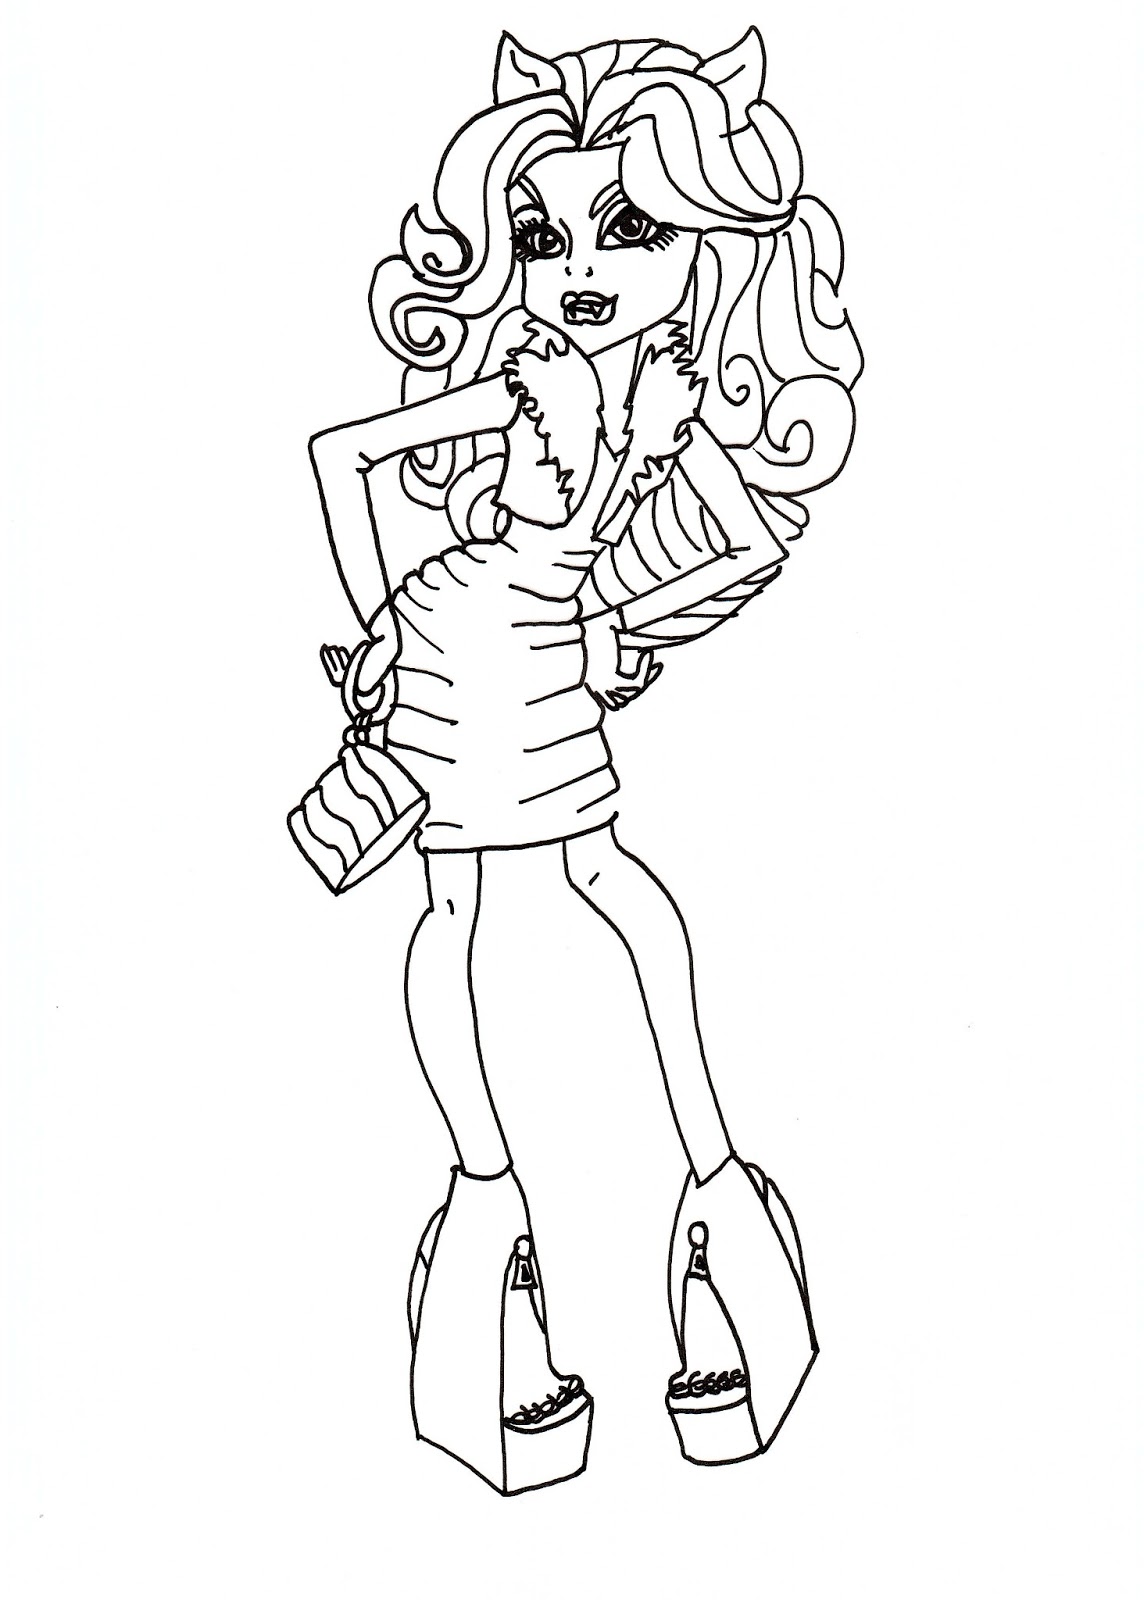 Clawdeen Wolf Fashion Coloring Sheet CLICK HERE TO PRINT Free printable monster high